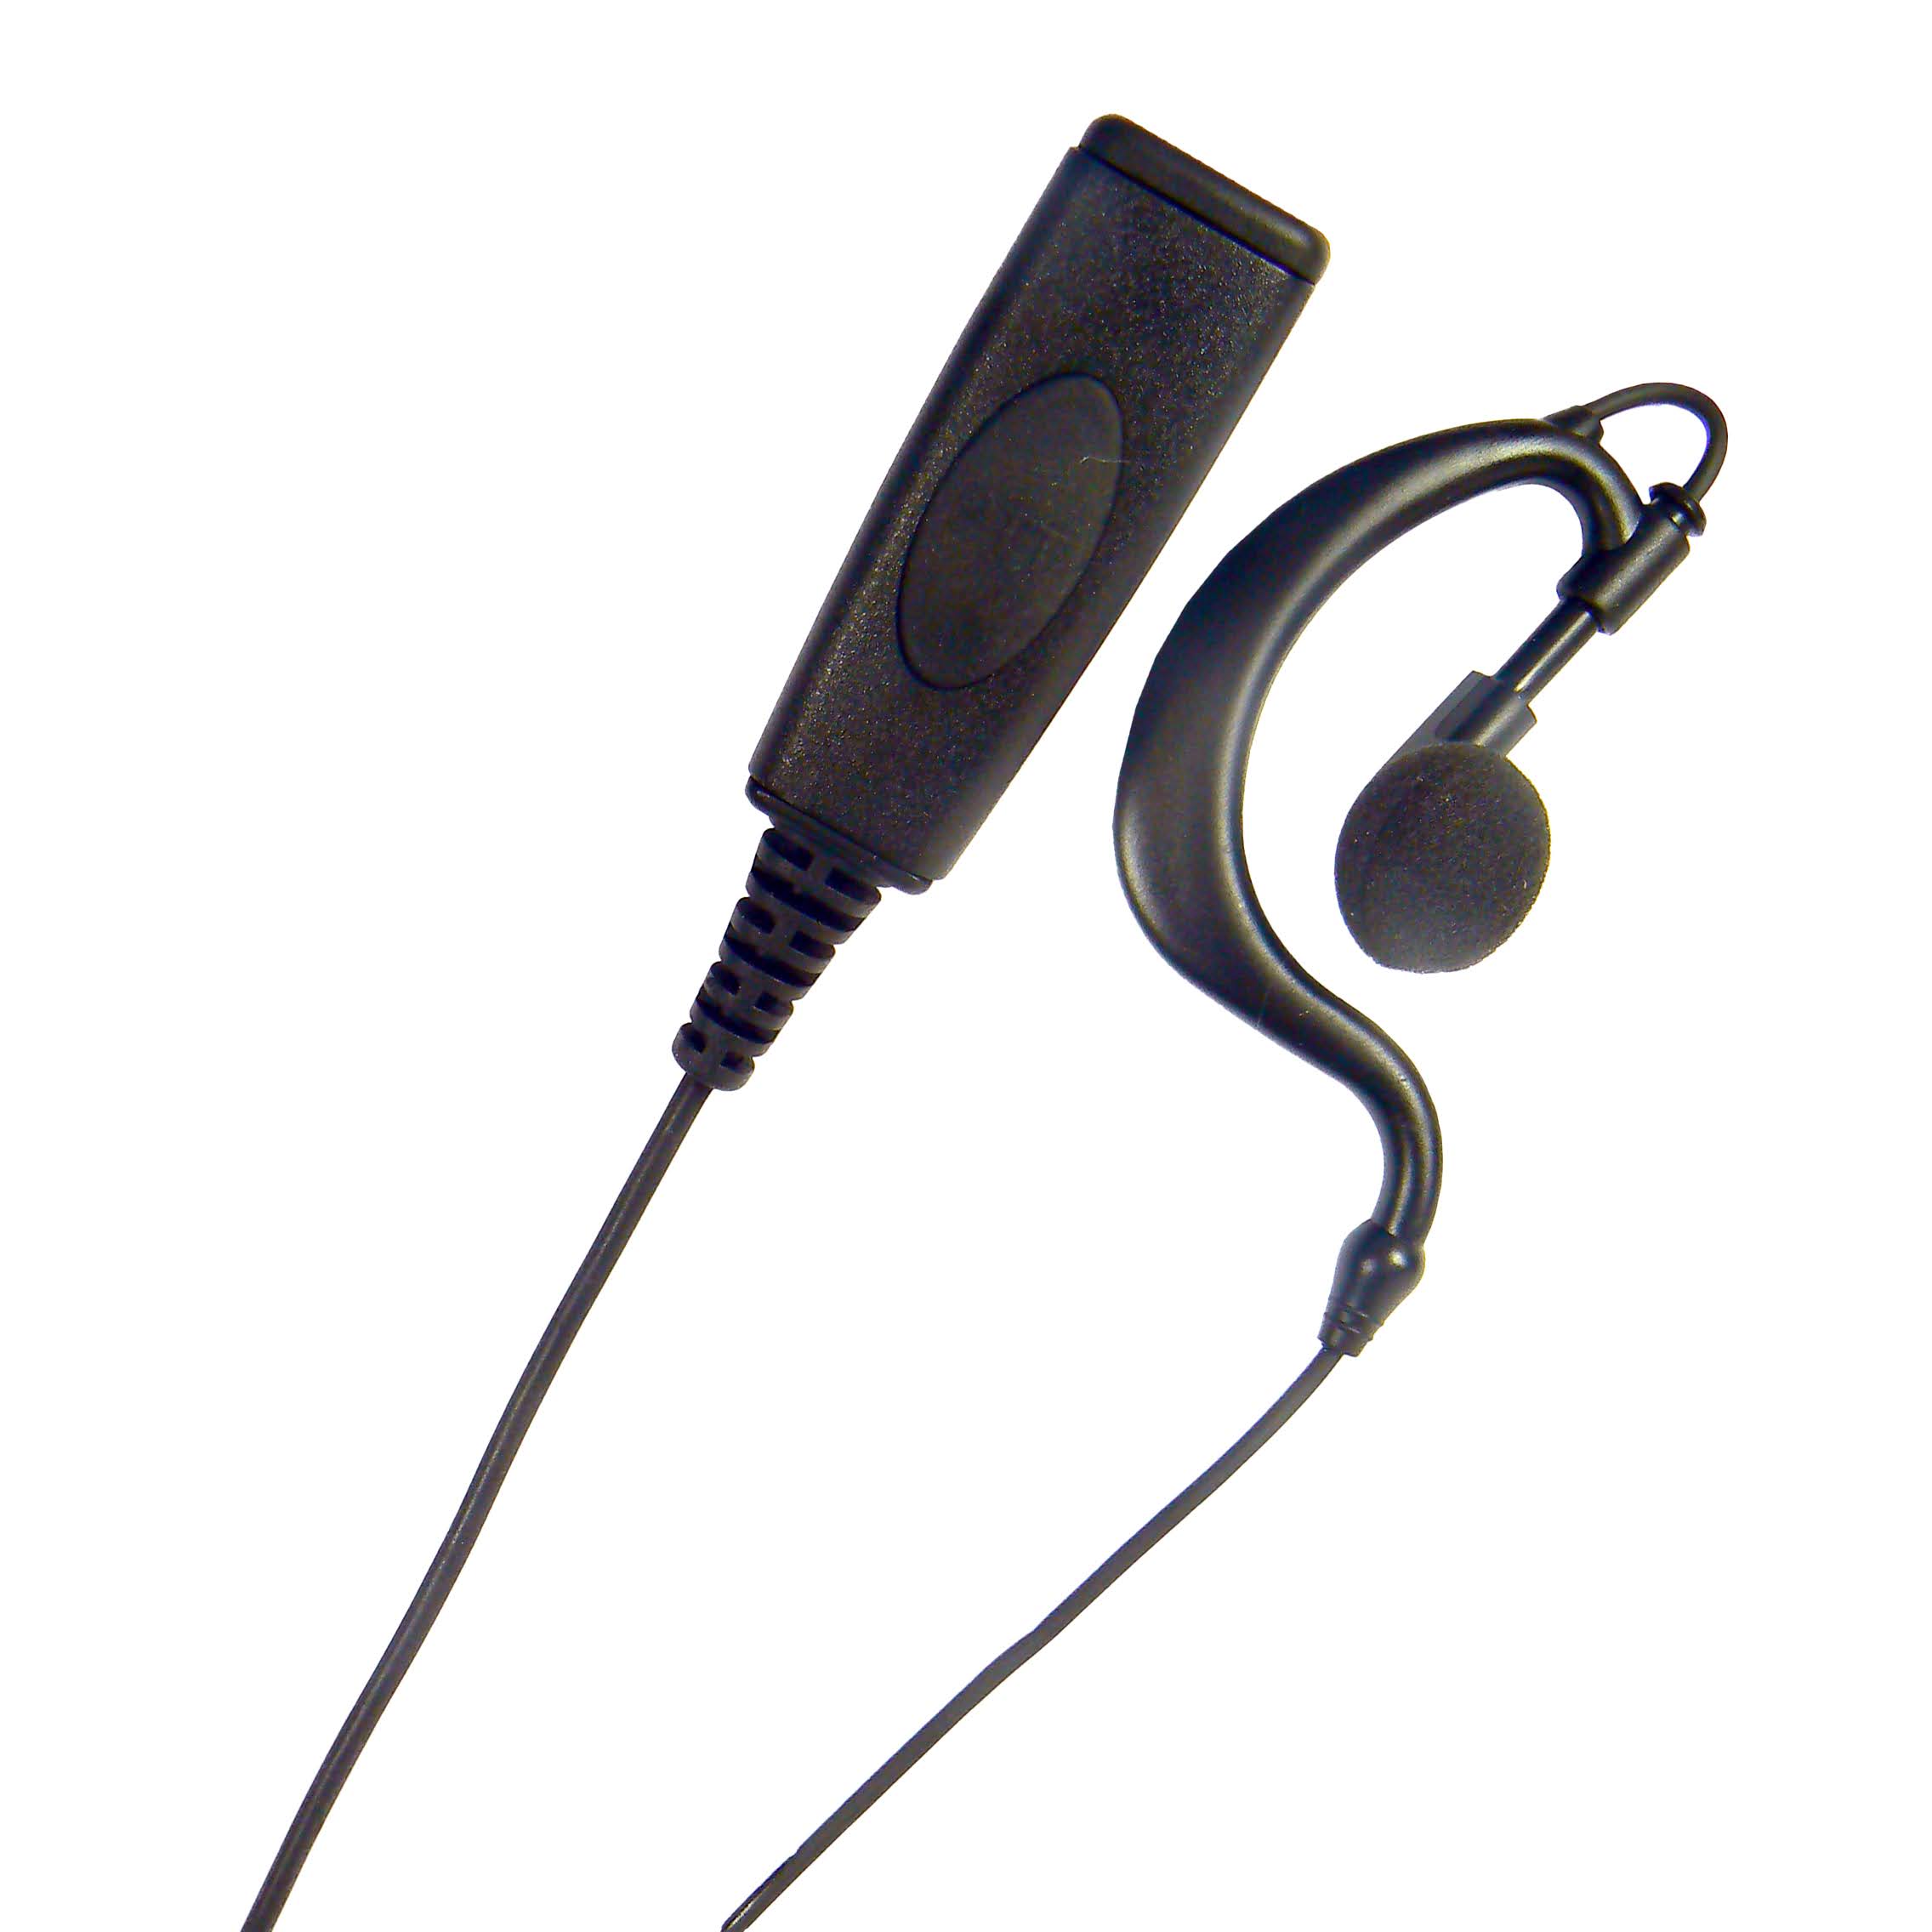 PTT with G-Shape earpiece for Tetra Radio